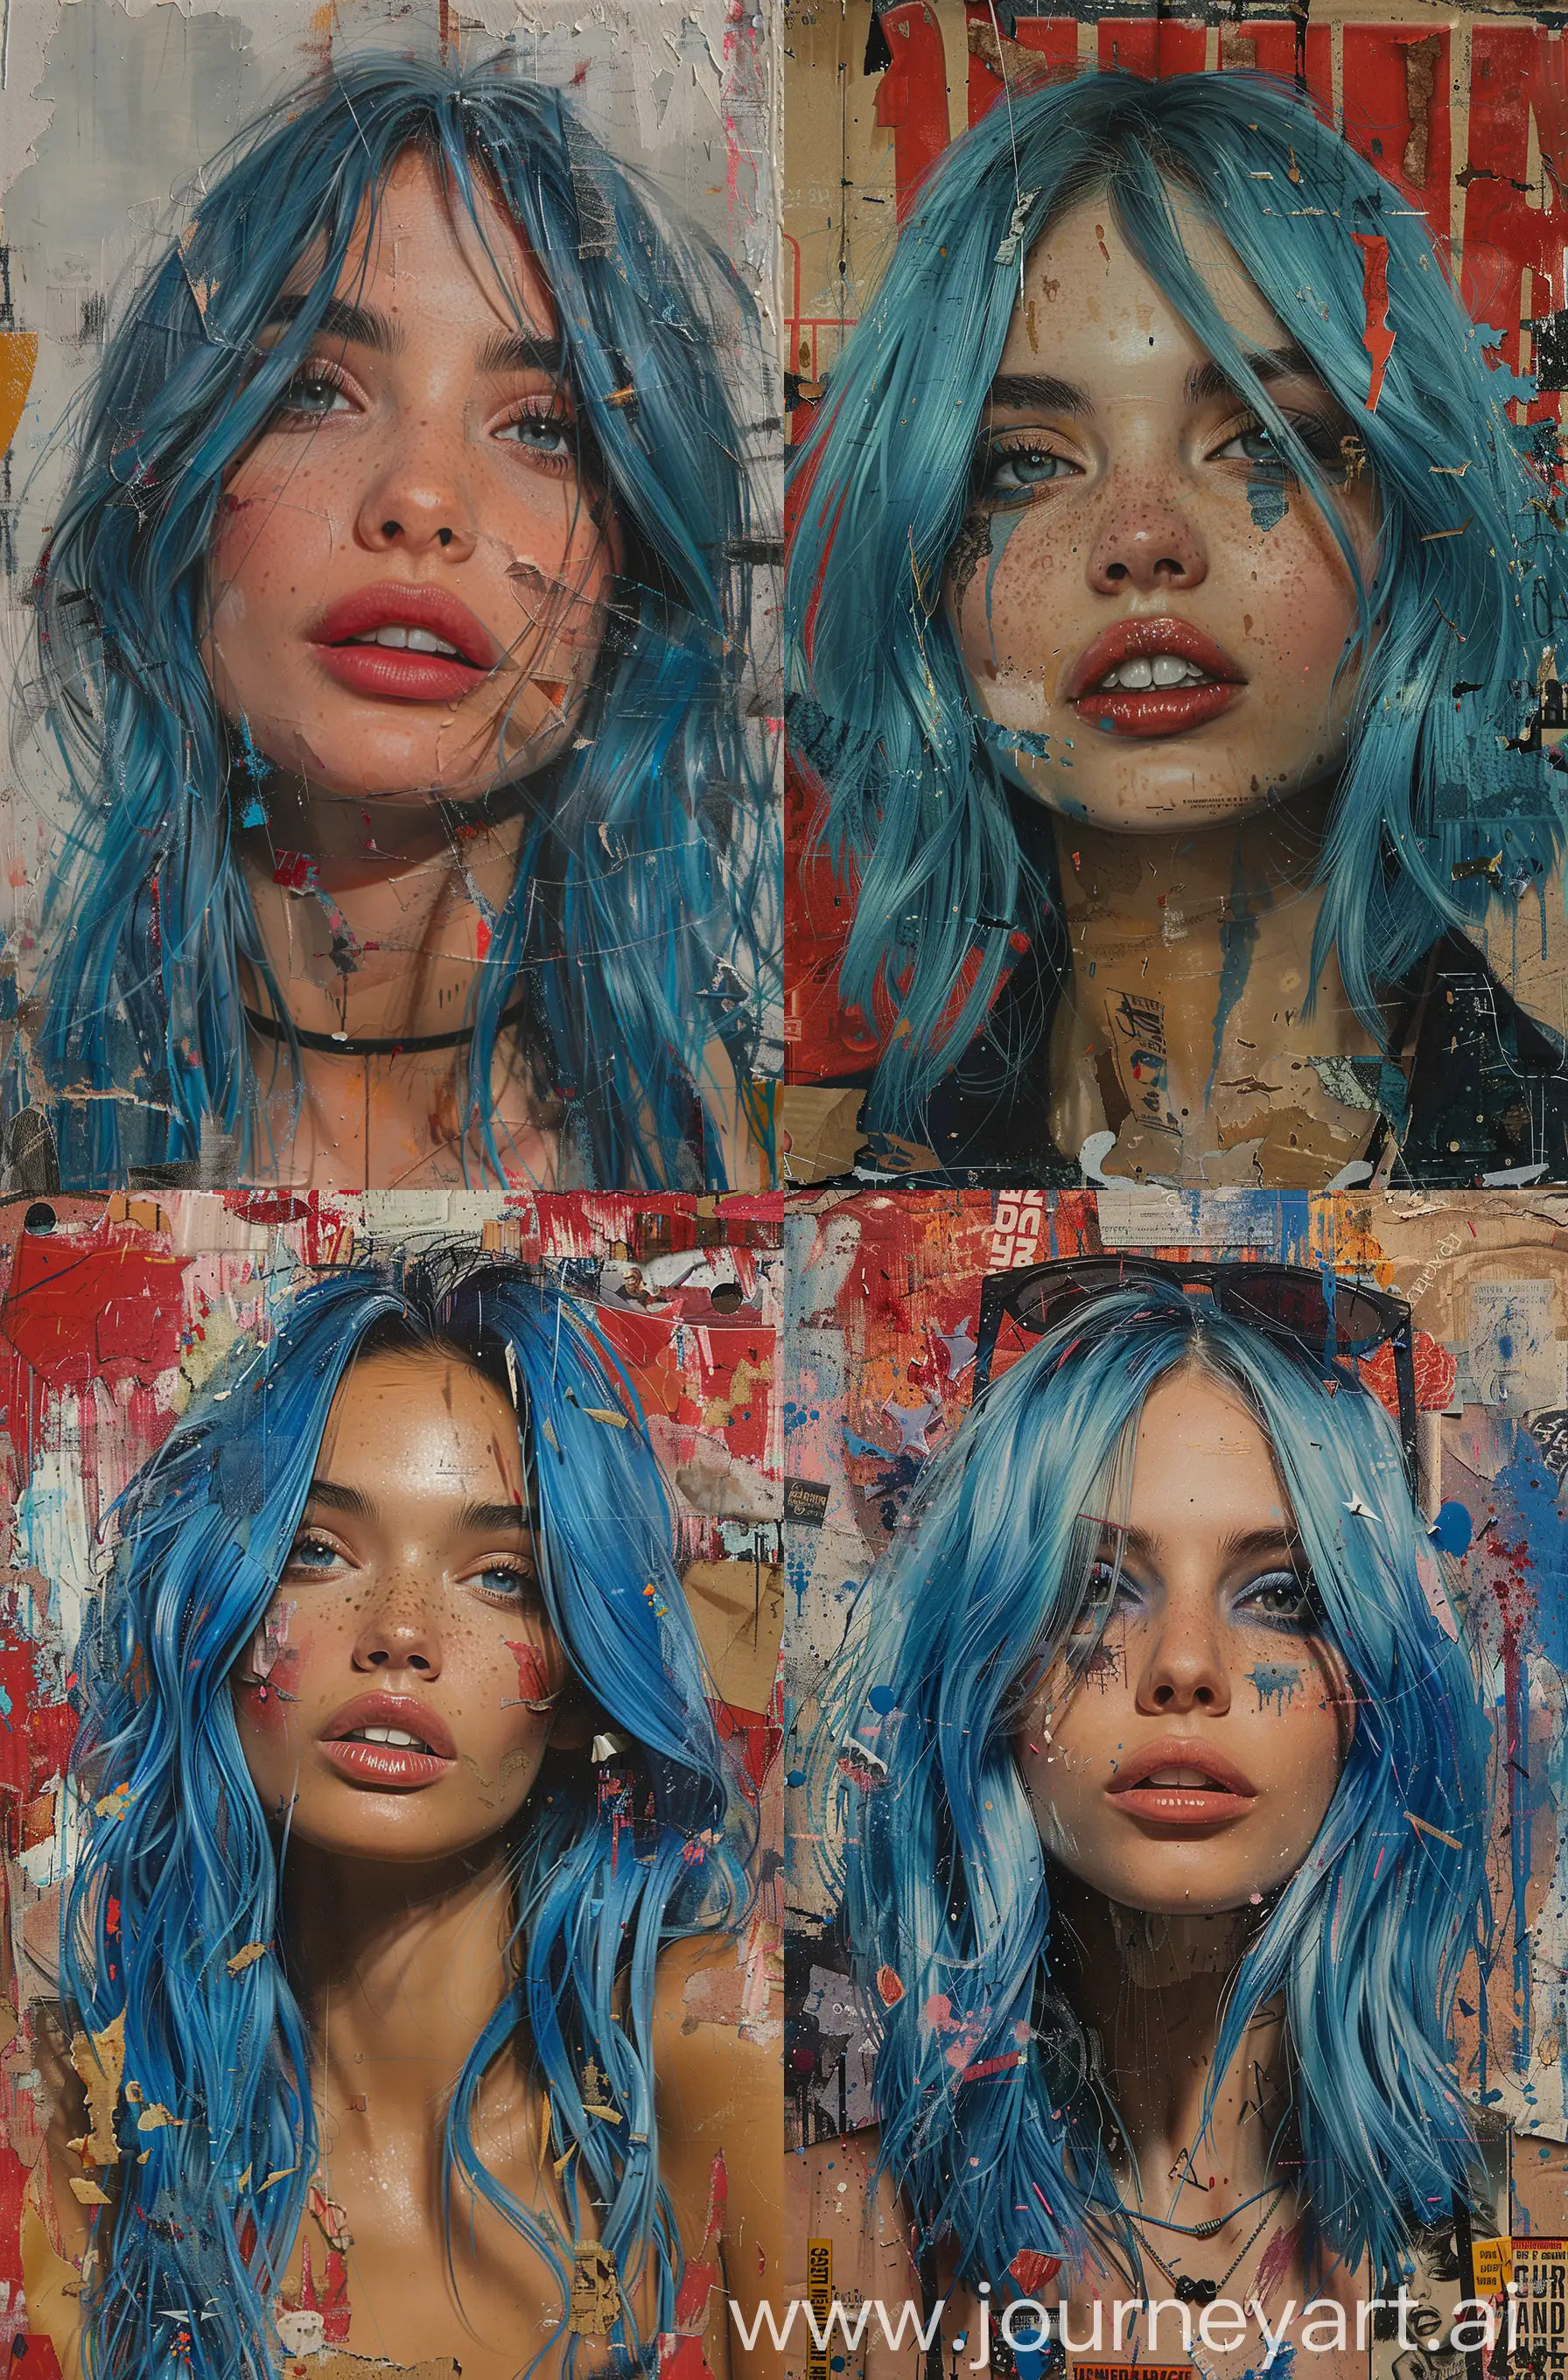 Edgy-Street-Art-Portrait-Woman-with-Blue-Hair-in-MultiLayered-Collage-Style